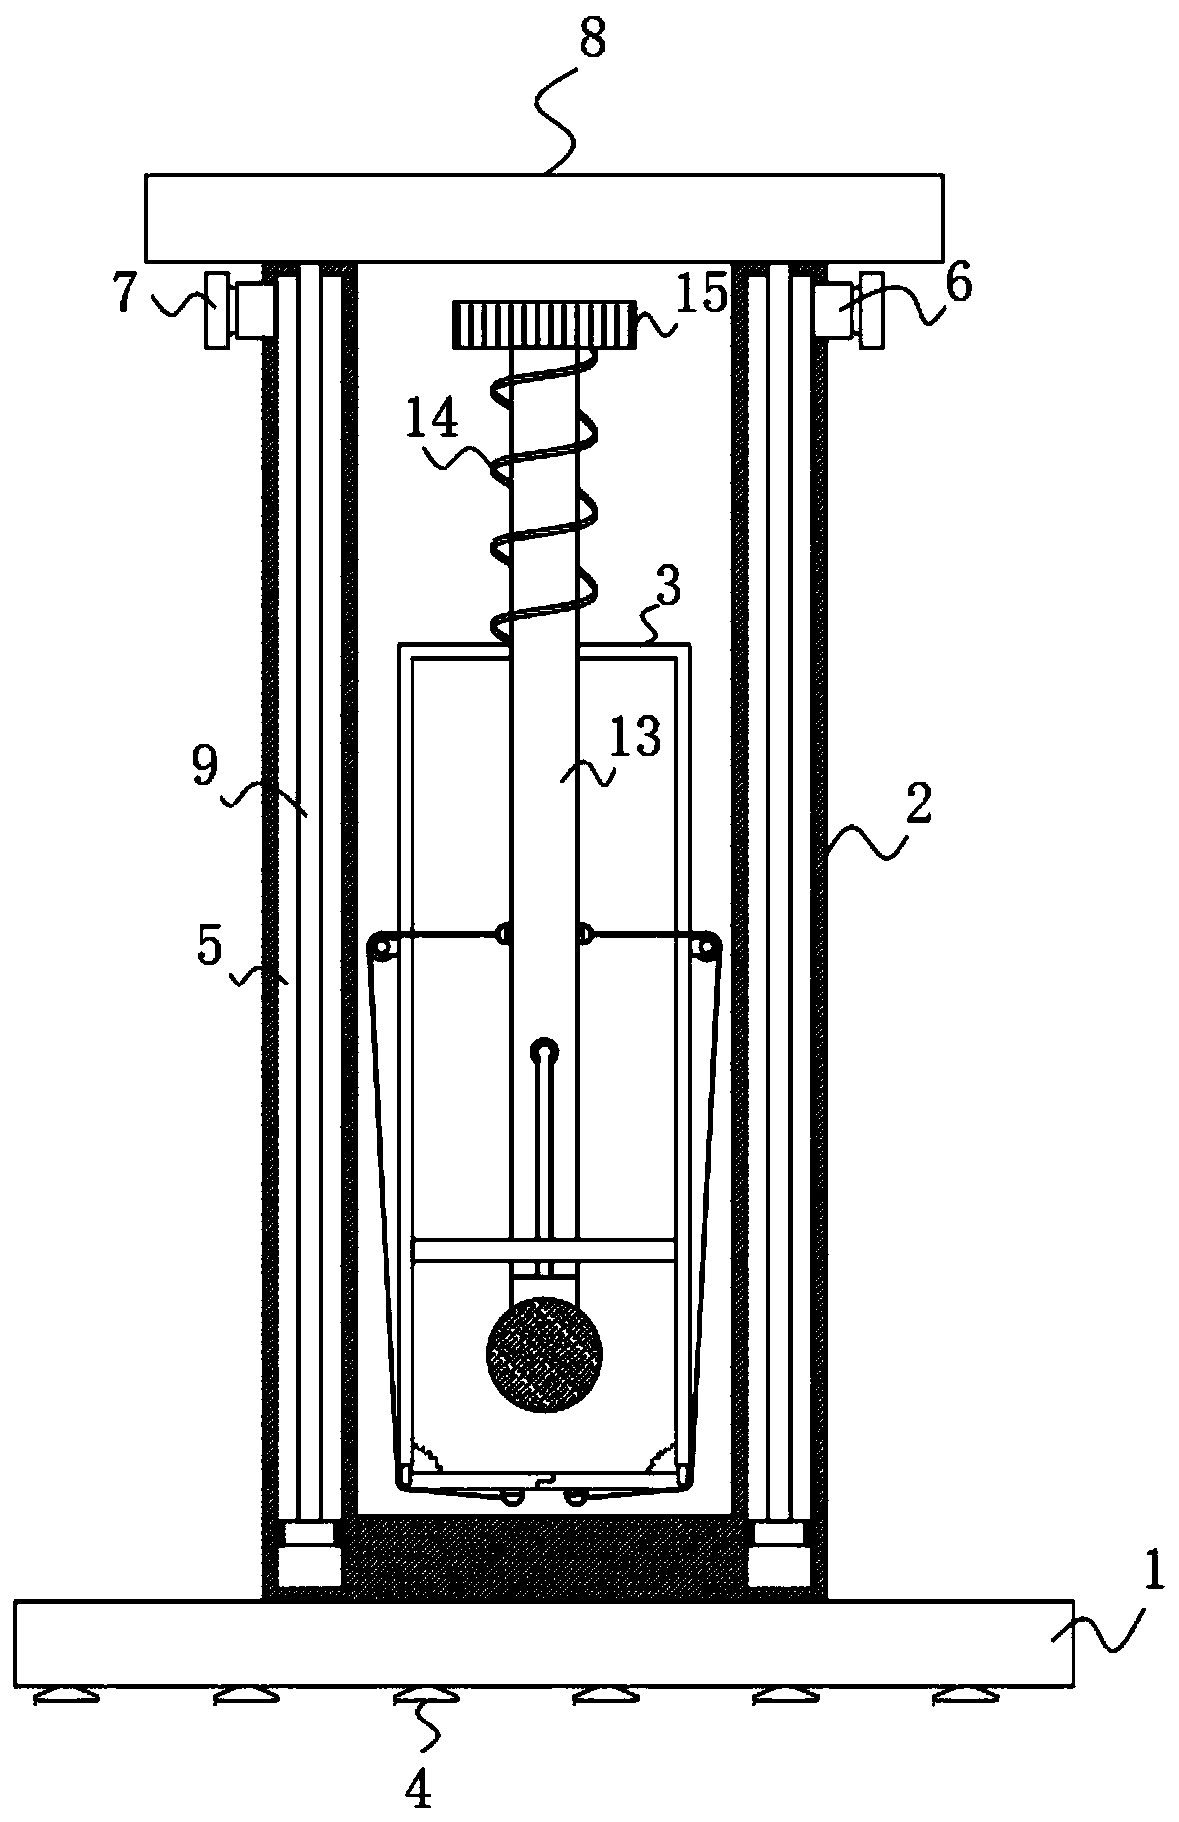 Outpatient body fluid collecting and processing device